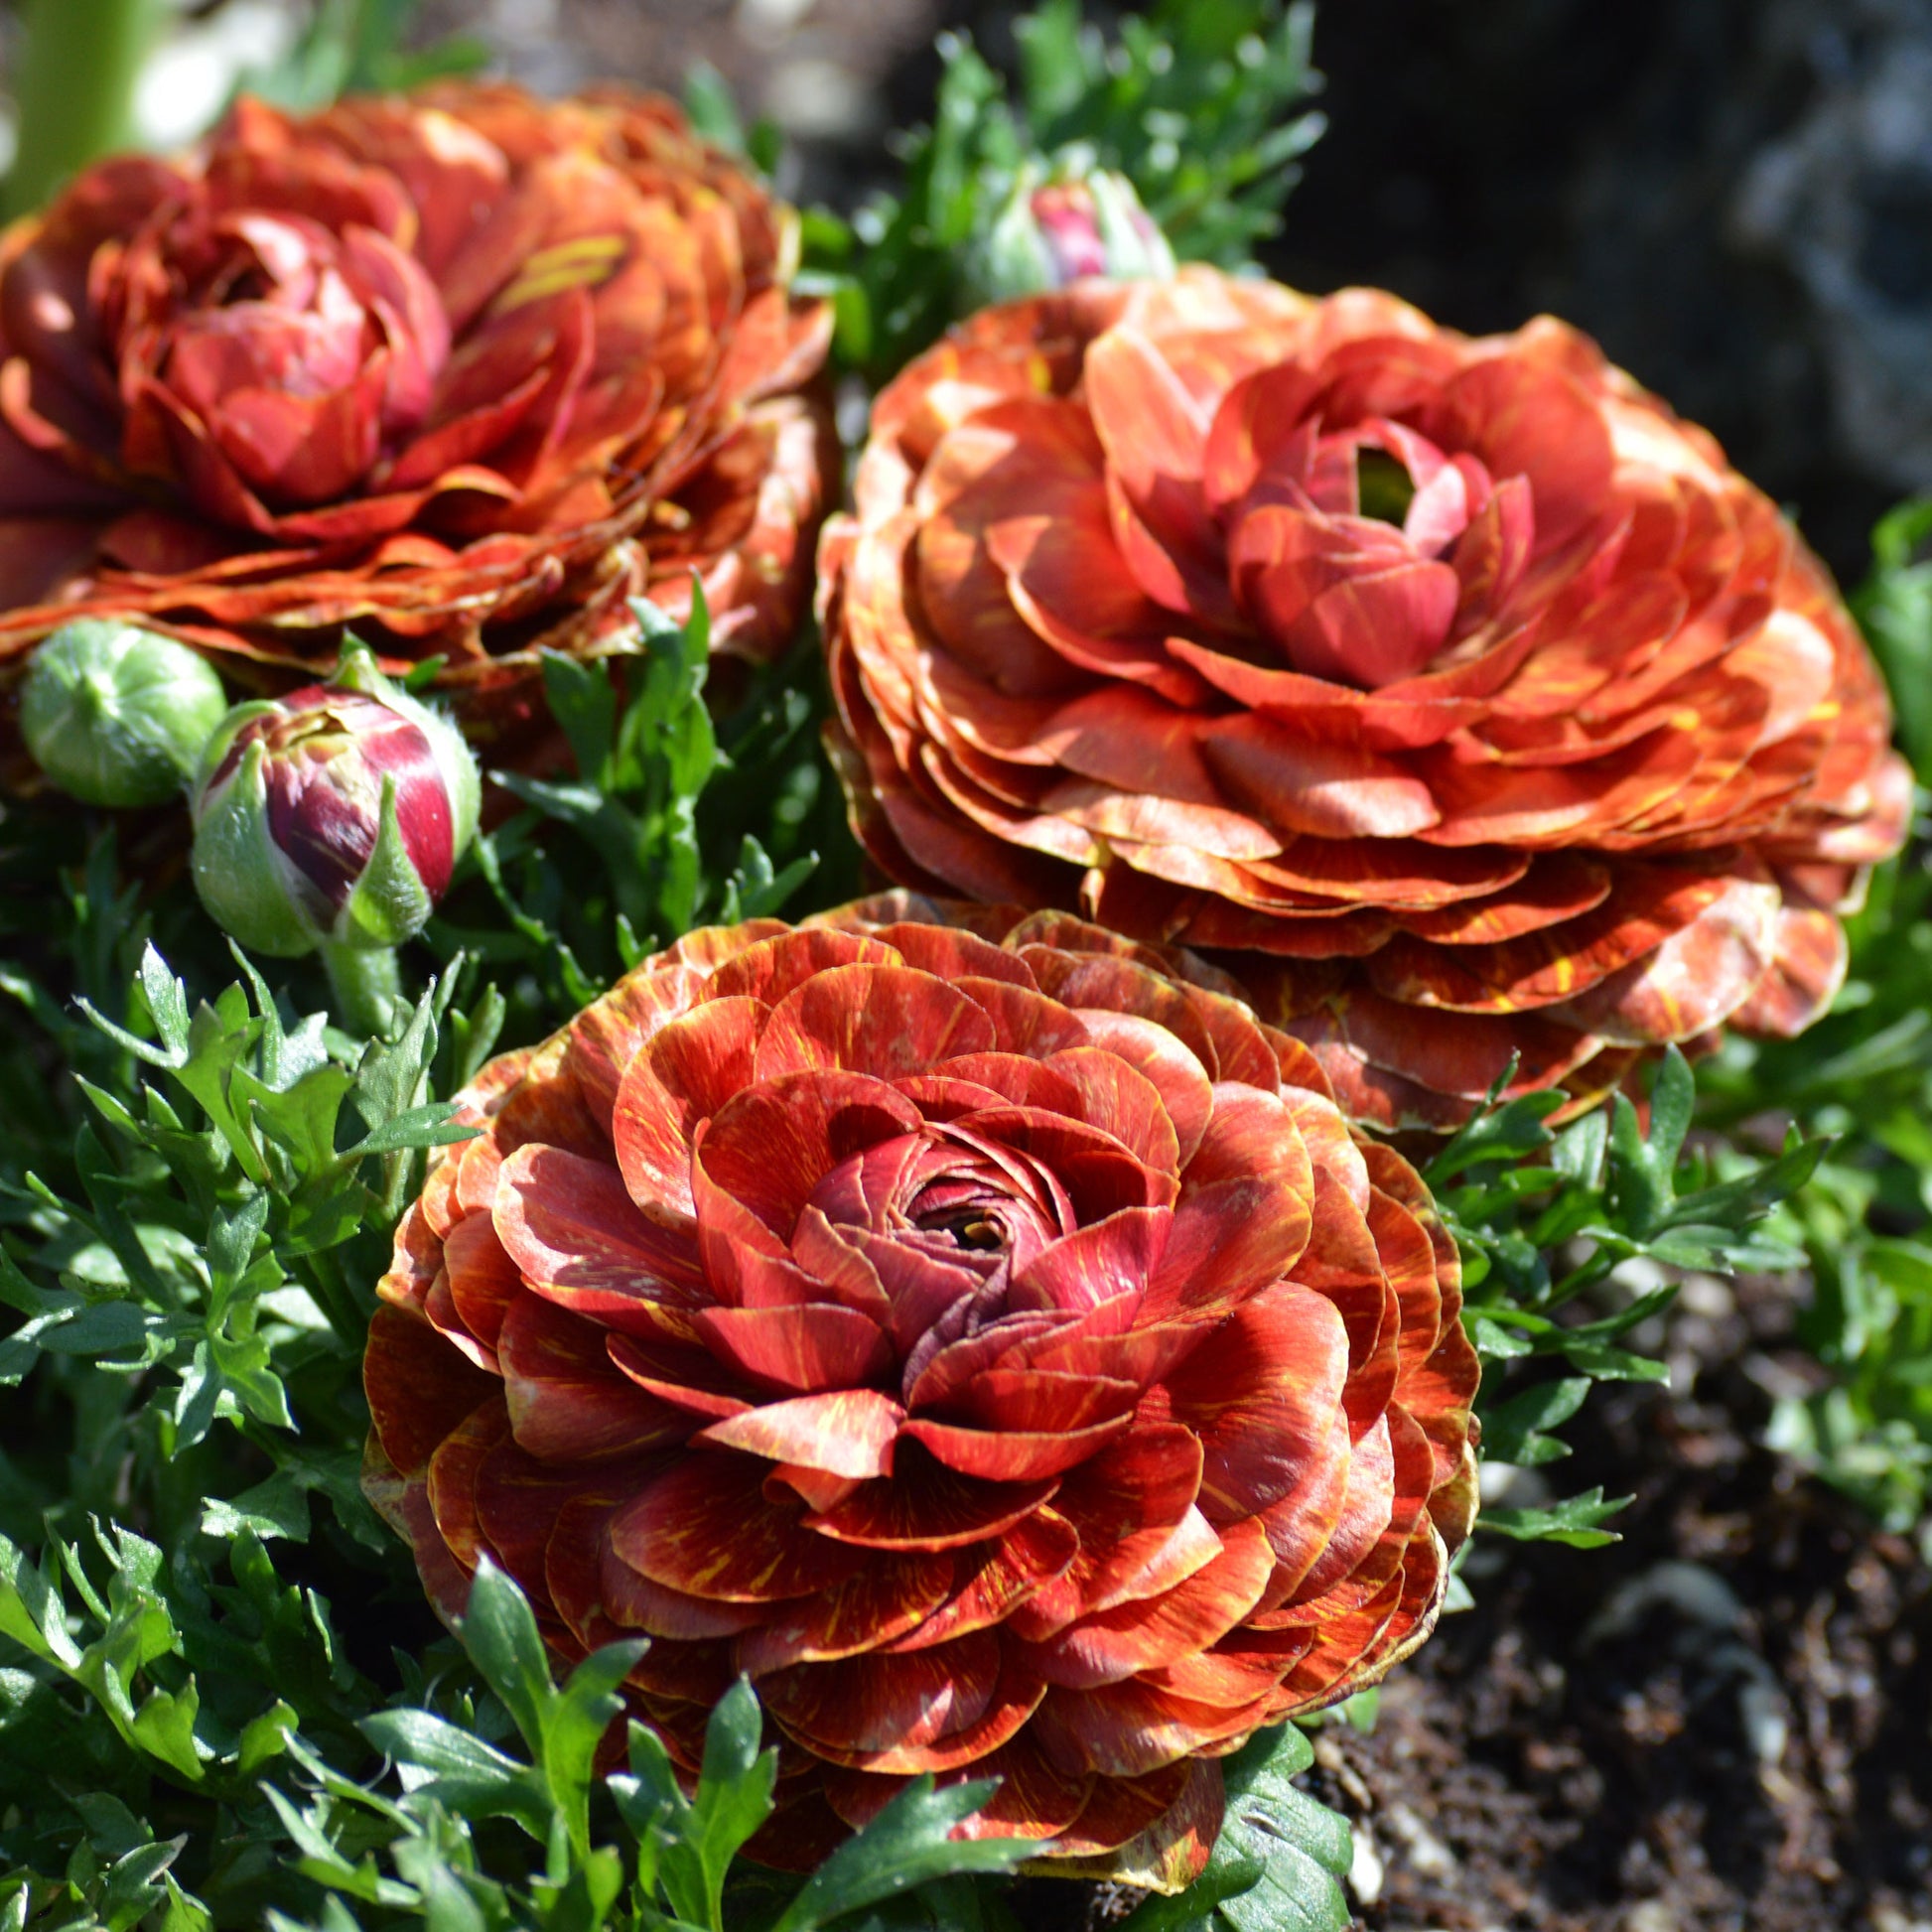 Ranunculus Bulbs - Pink Confetti Mix - 20 Bulbs / Fall-Planted | Ships in Fall, Mixed, Eden Brothers